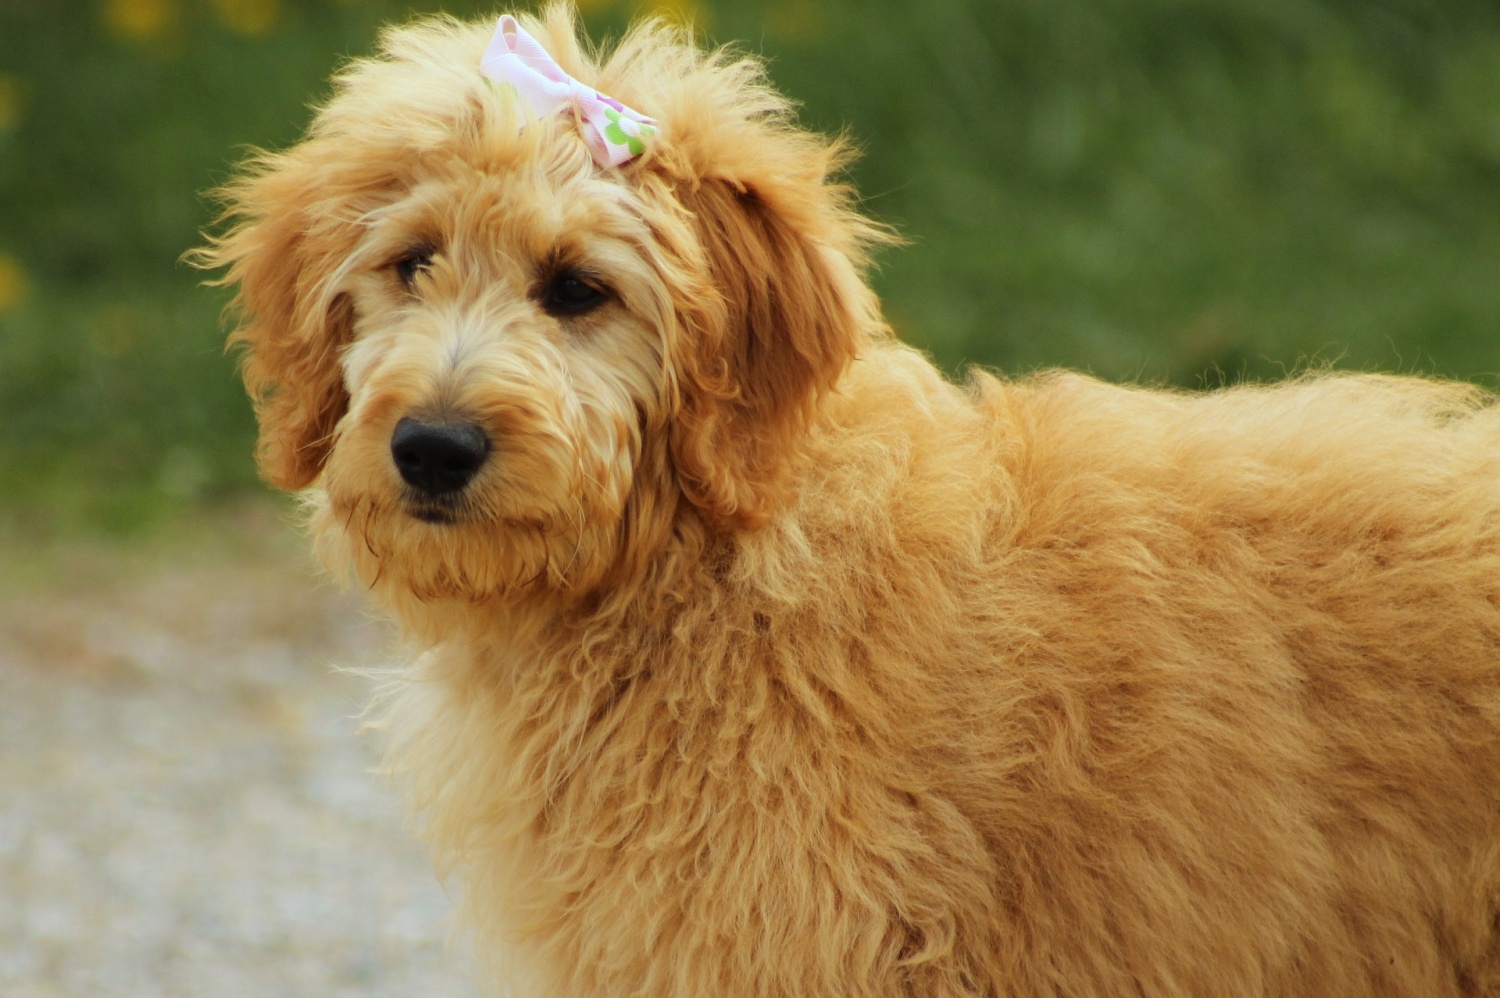 2. 10 Best Goldendoodle Haircut Styles for 2021 - wide 2